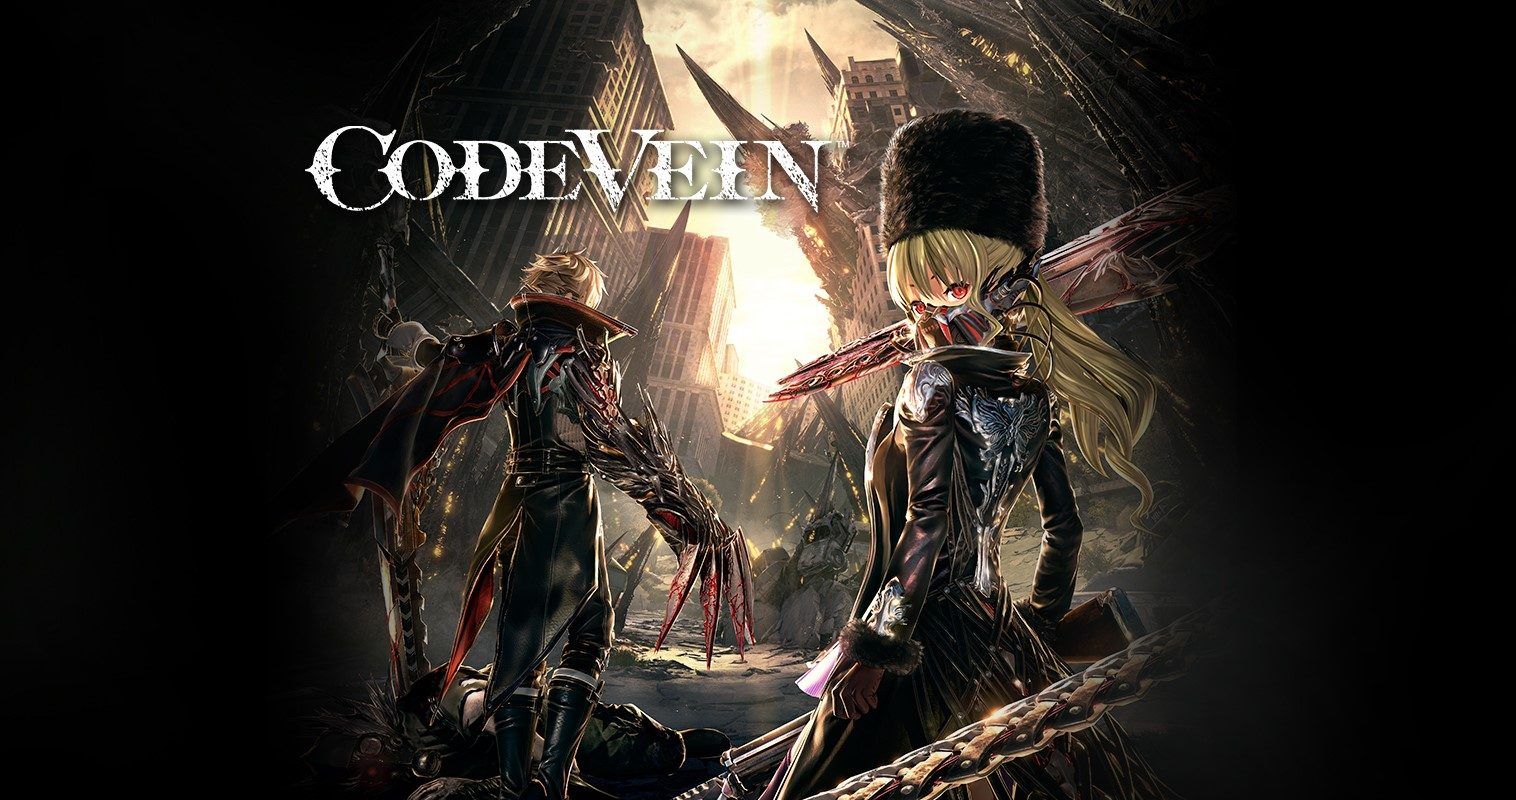 Discoverings: code vein how to get true ending - A Comprehensive Guide